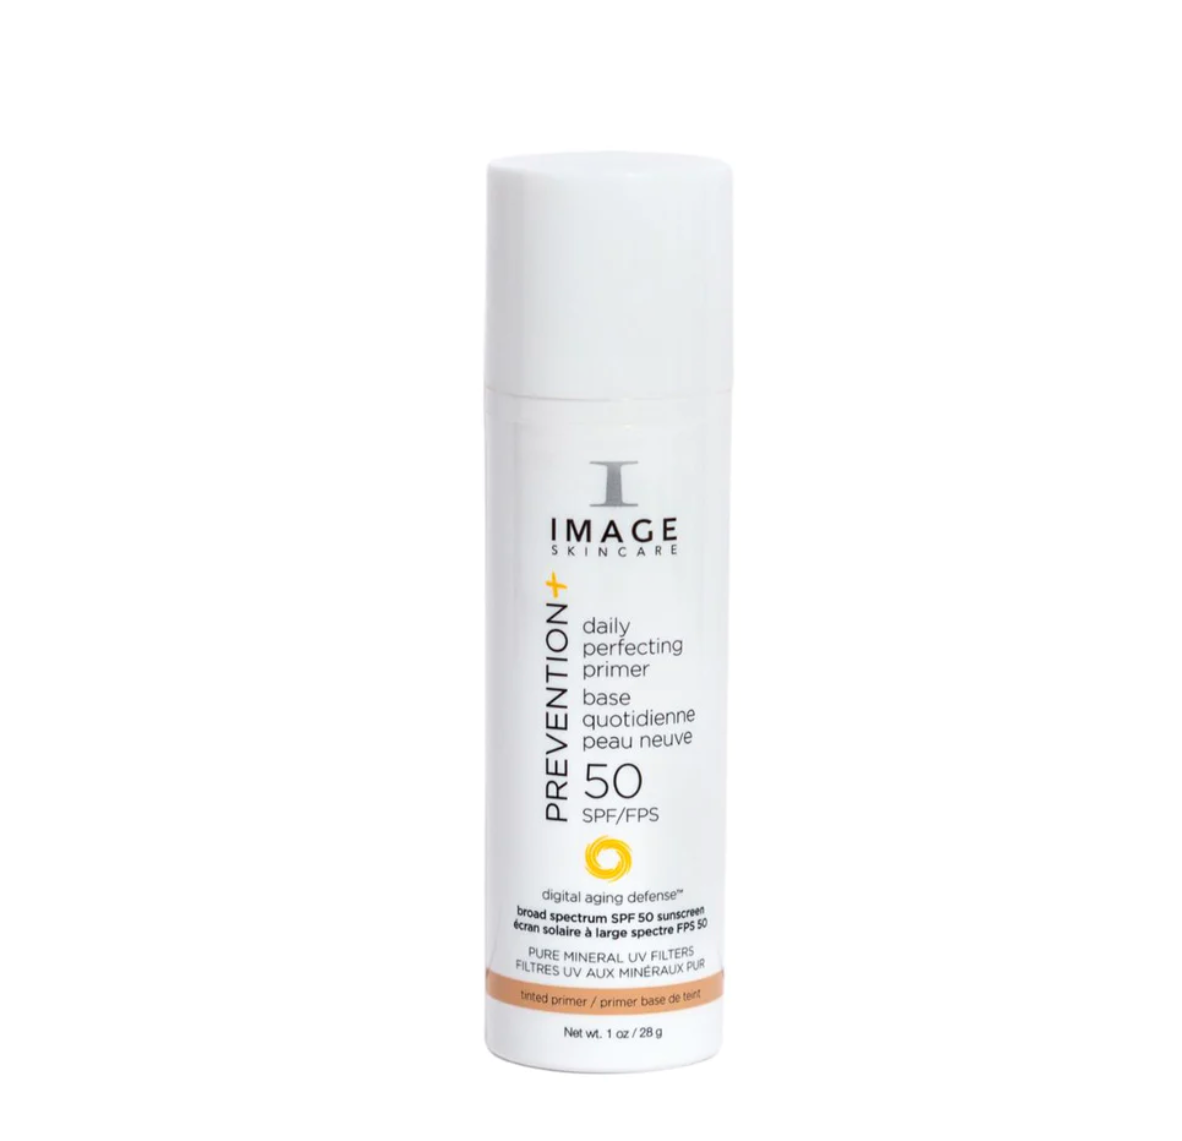 Image Prevention Daily Perfecting Primer SPF 50